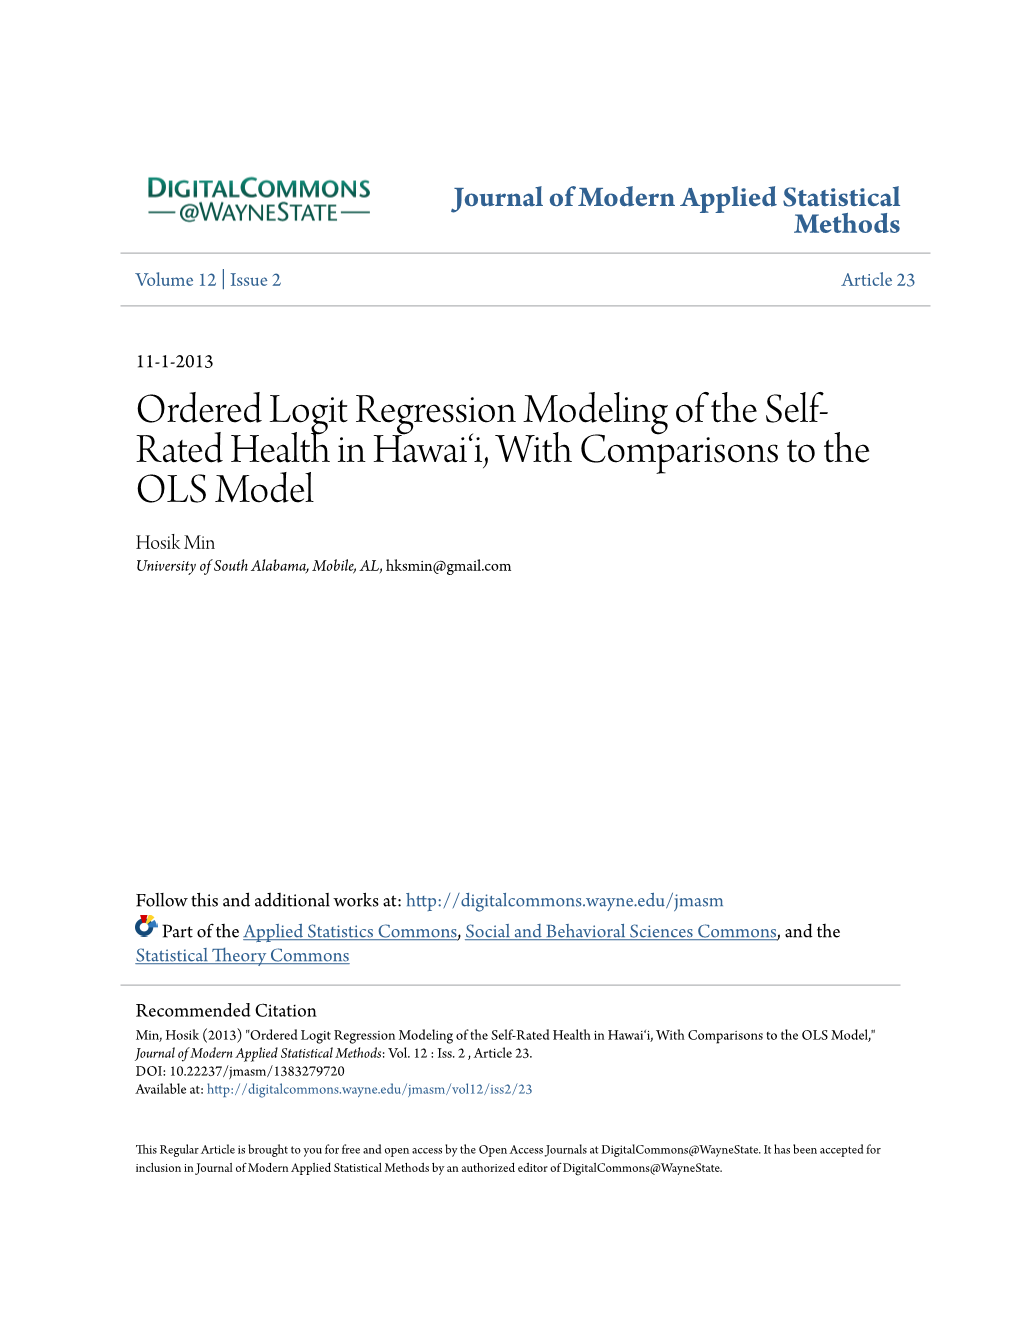 Ordered Logit Regression Modeling of the Self-Rated Health in Hawai'i